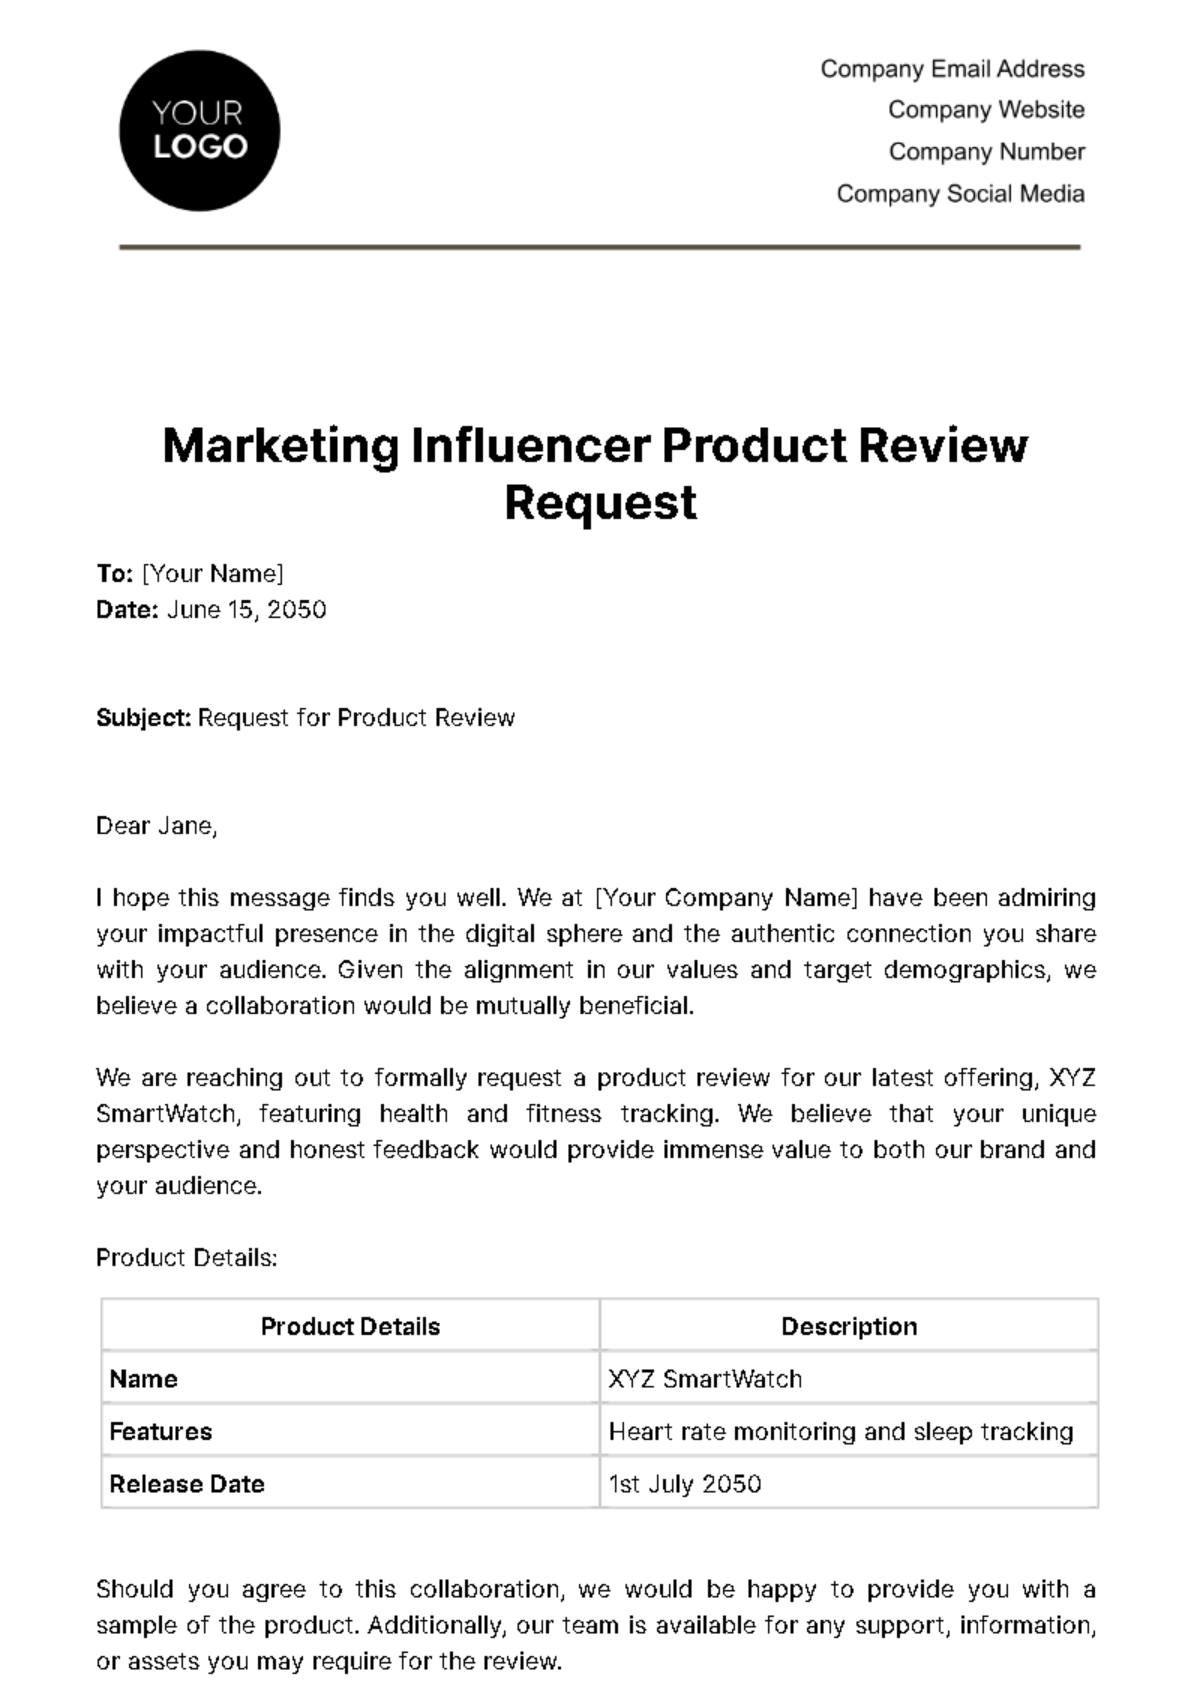 Marketing Influencer Product Review Request Template